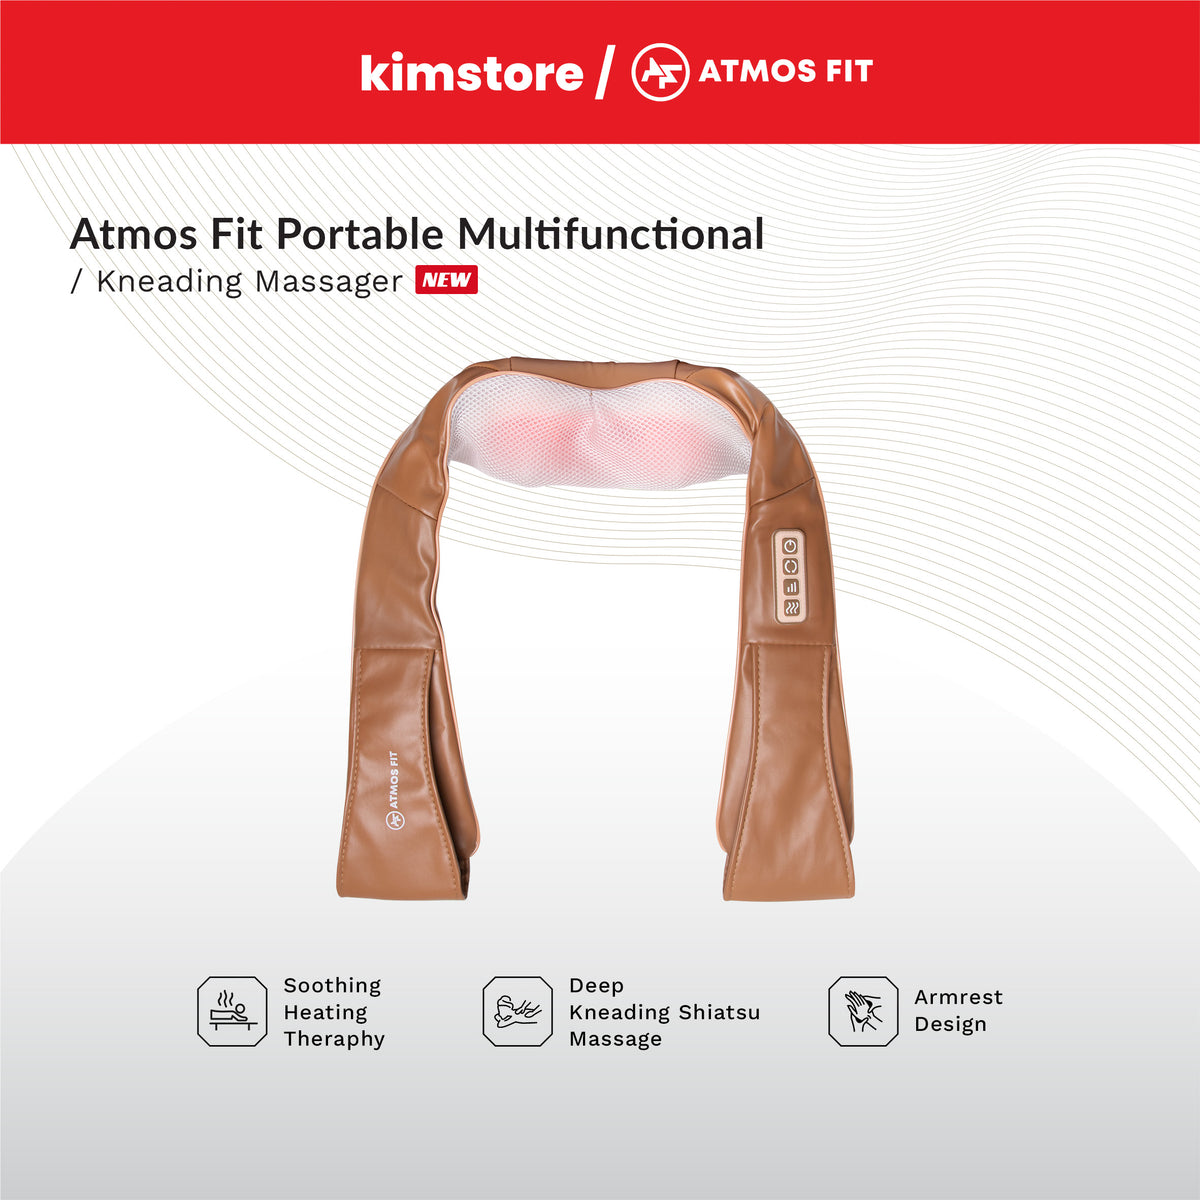 ATMOS FIT Portable Multifunctional Kneading Massager